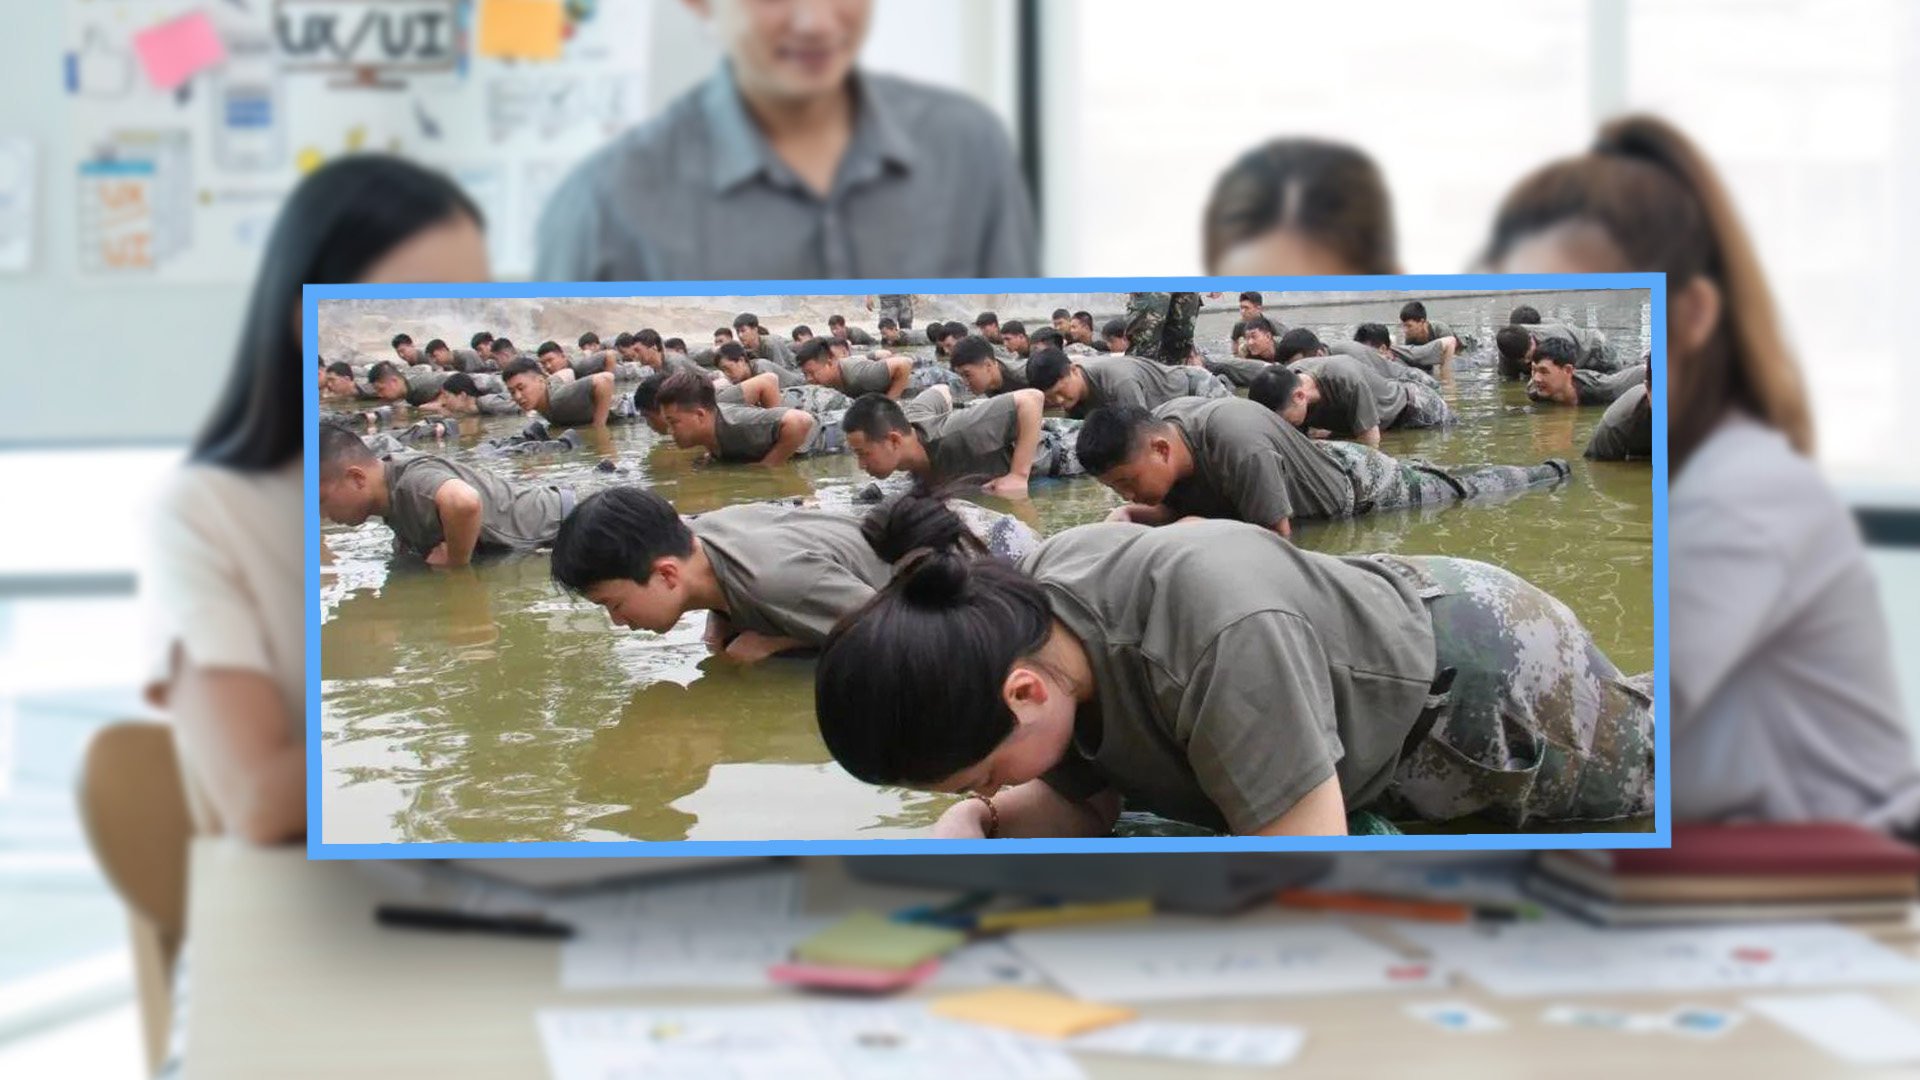 A big food and drink company in China has faced criticism for making management trainee recruits undergo military-style training at an army base. Photo: SCMP composite/Shutterstock/Weibo